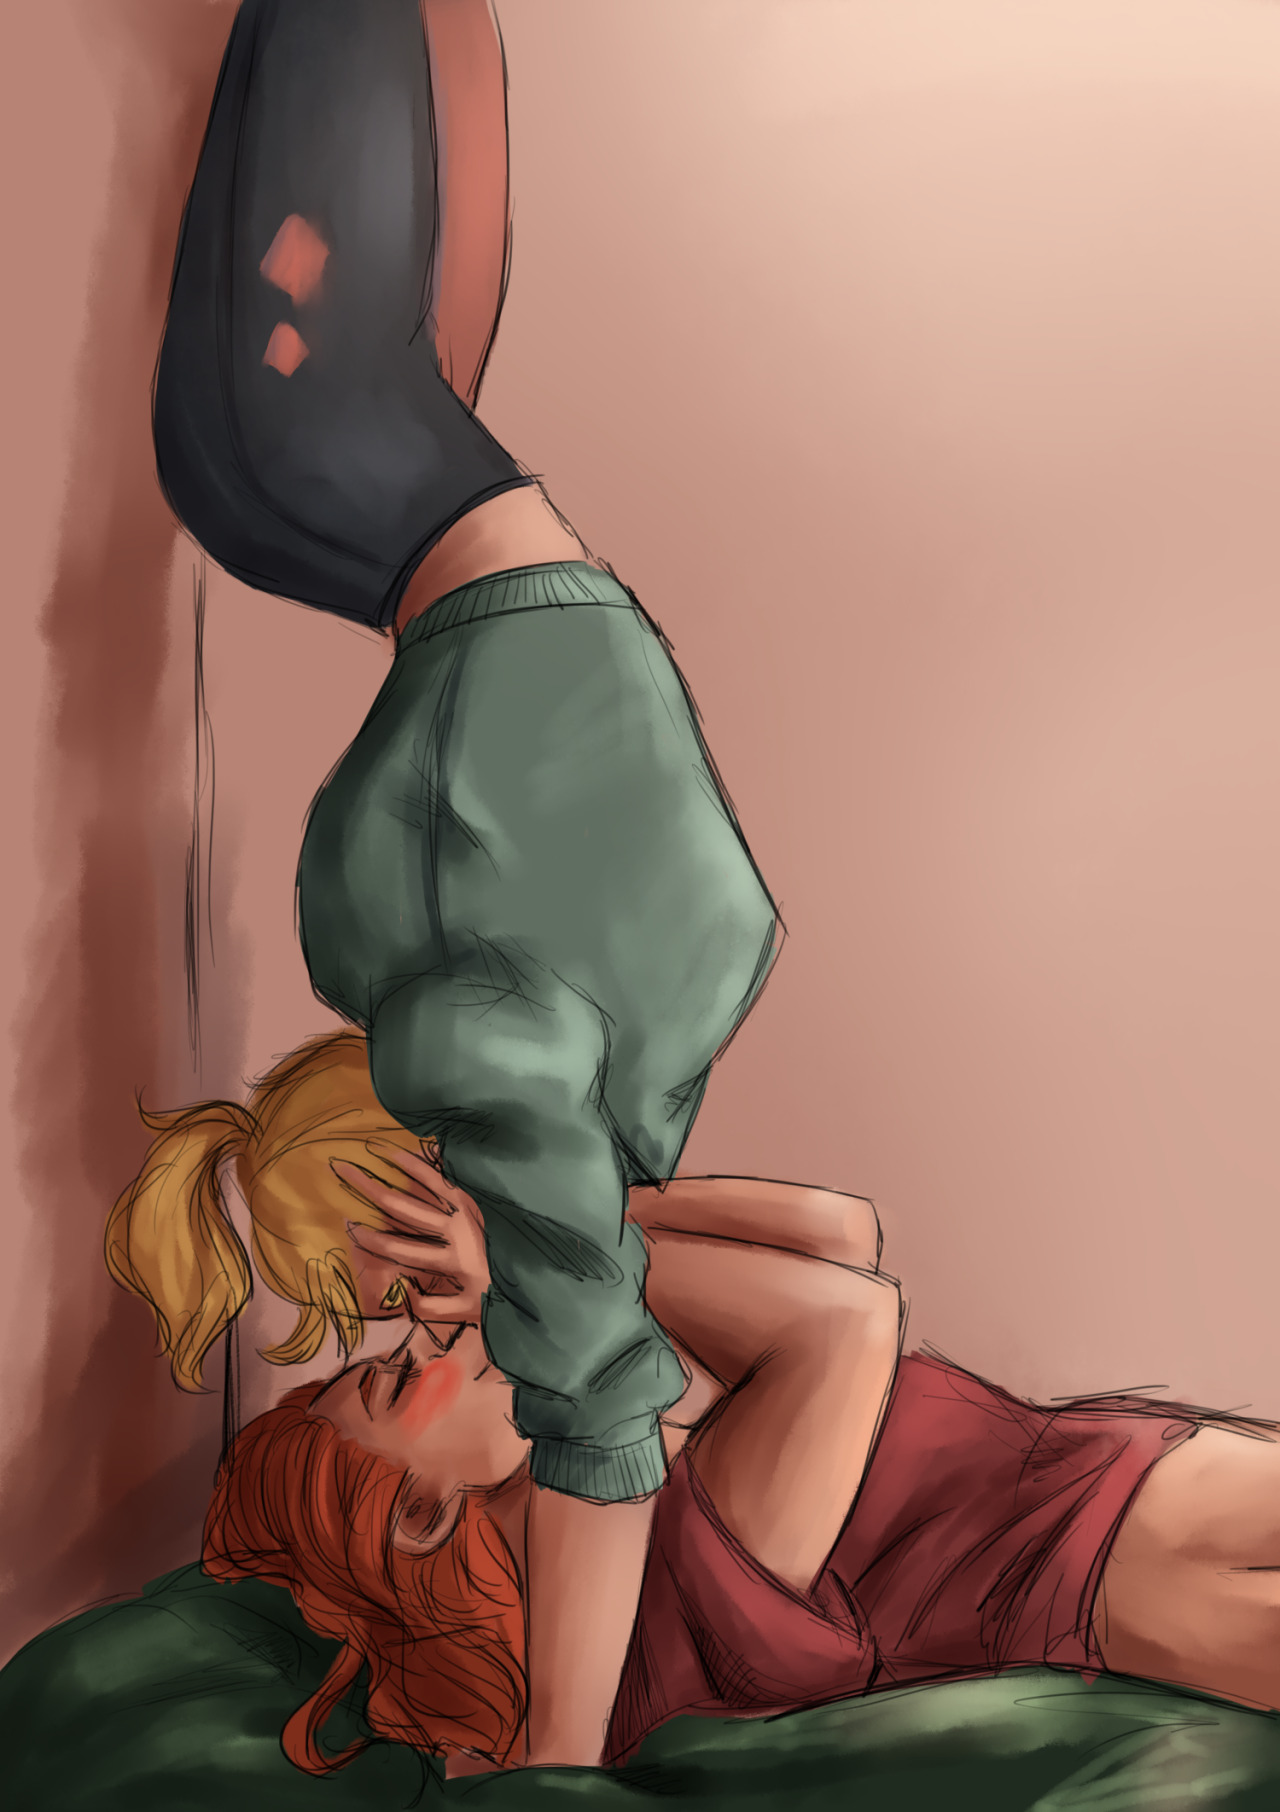 amanda-jp: “Red, you’re throwing off my routine!” “Shut up and kiss me, Harl.”